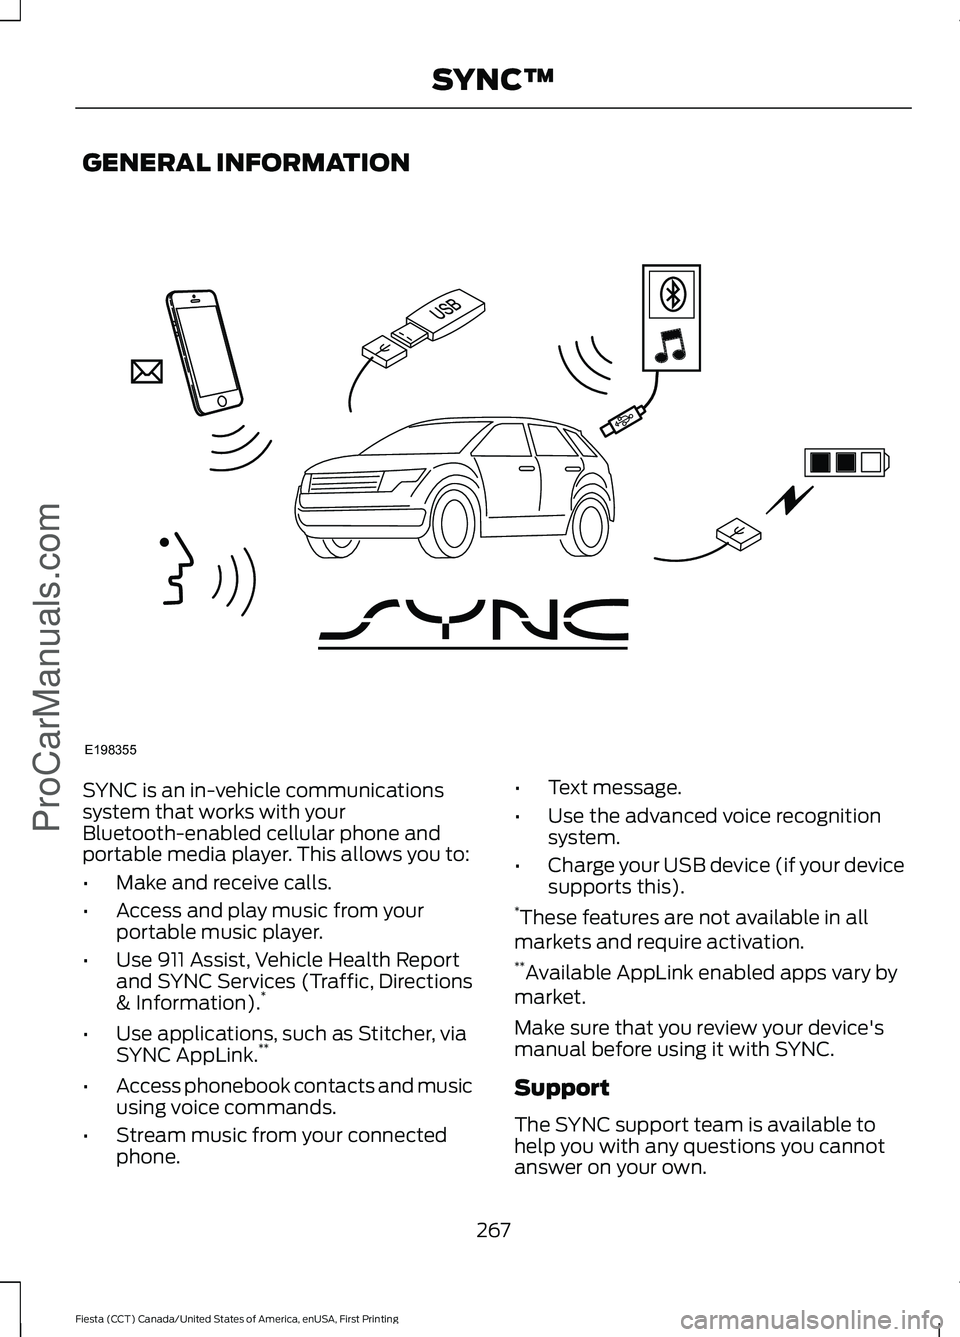 FORD FIESTA 2016  Owners Manual GENERAL INFORMATION
SYNC is an in-vehicle communications
system that works with your
Bluetooth-enabled cellular phone and
portable media player. This allows you to:
•
Make and receive calls.
• Acc